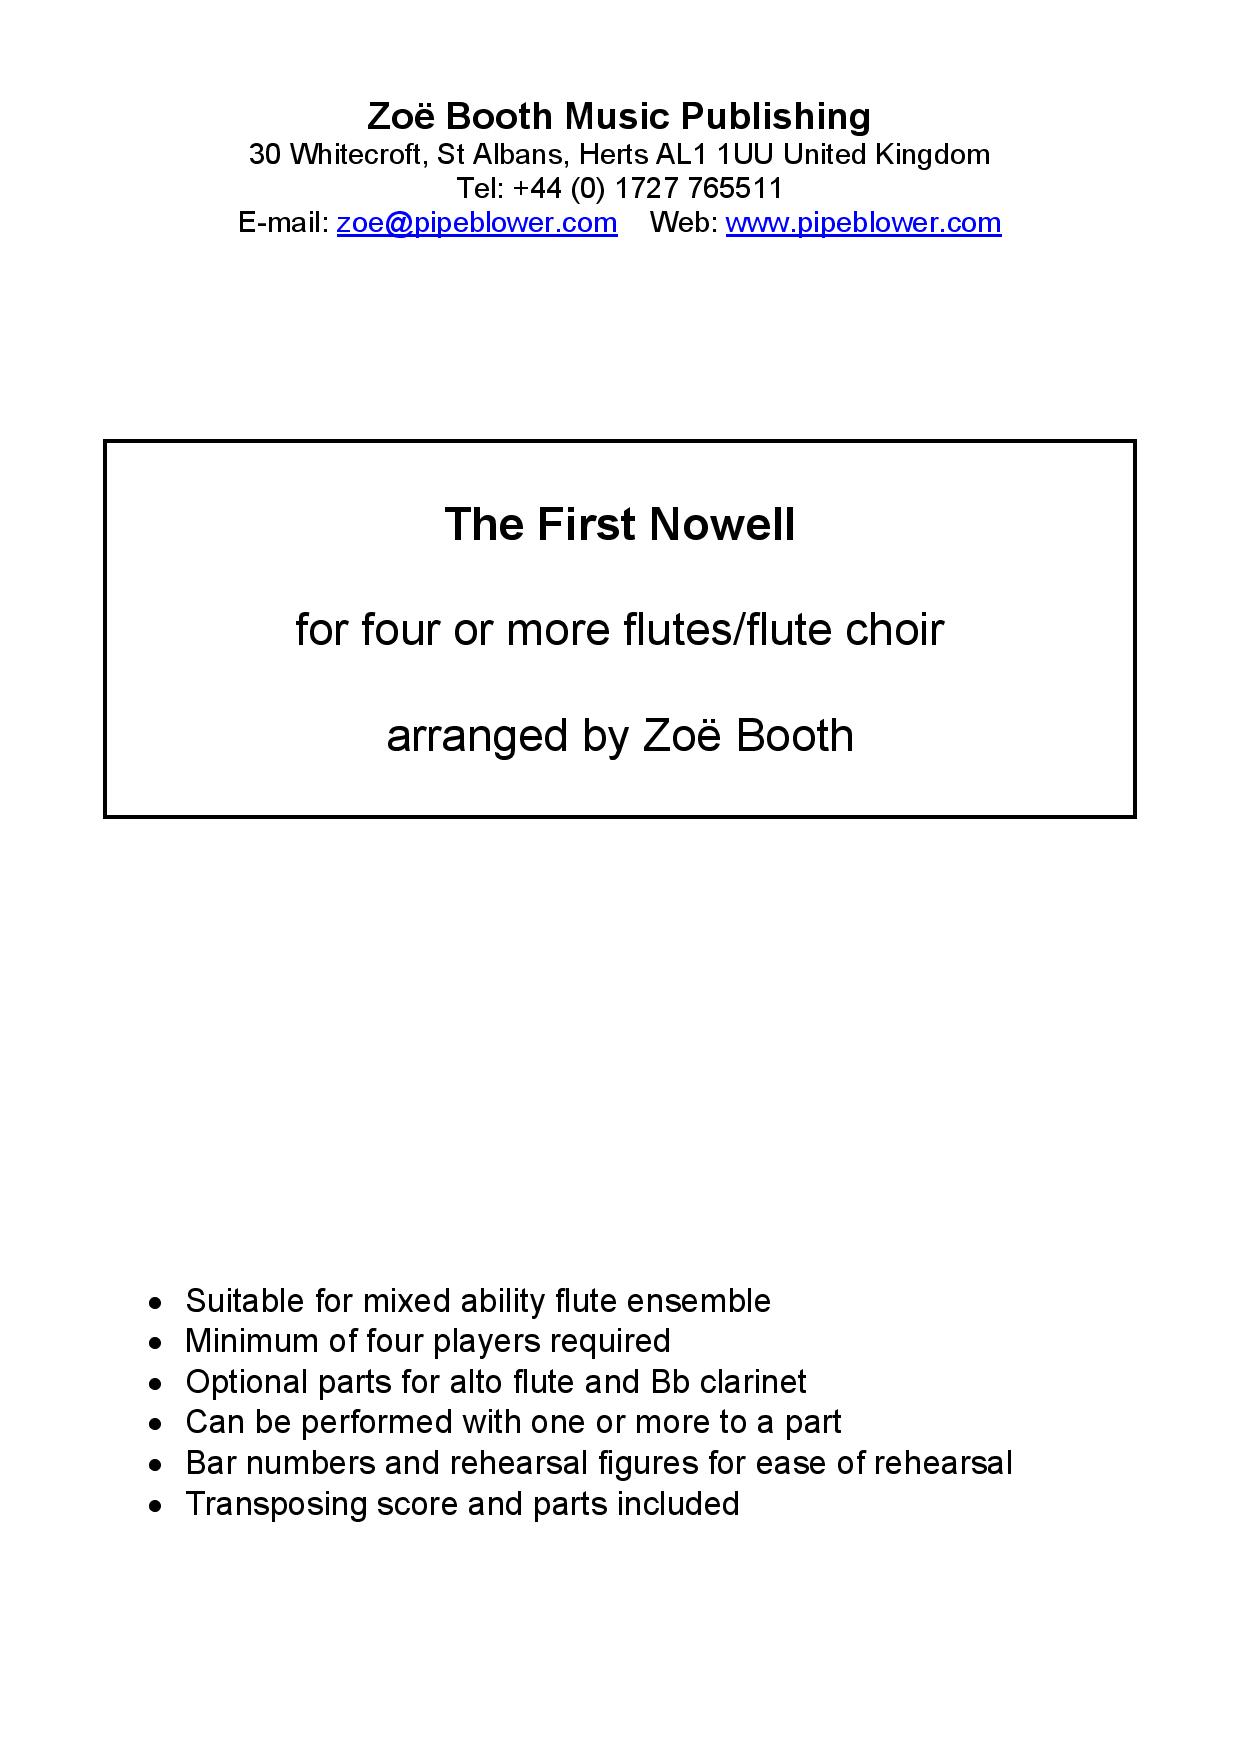 The First Nowell (Traditional),  arranged by Zoë Booth for four or more flutes/flute choir